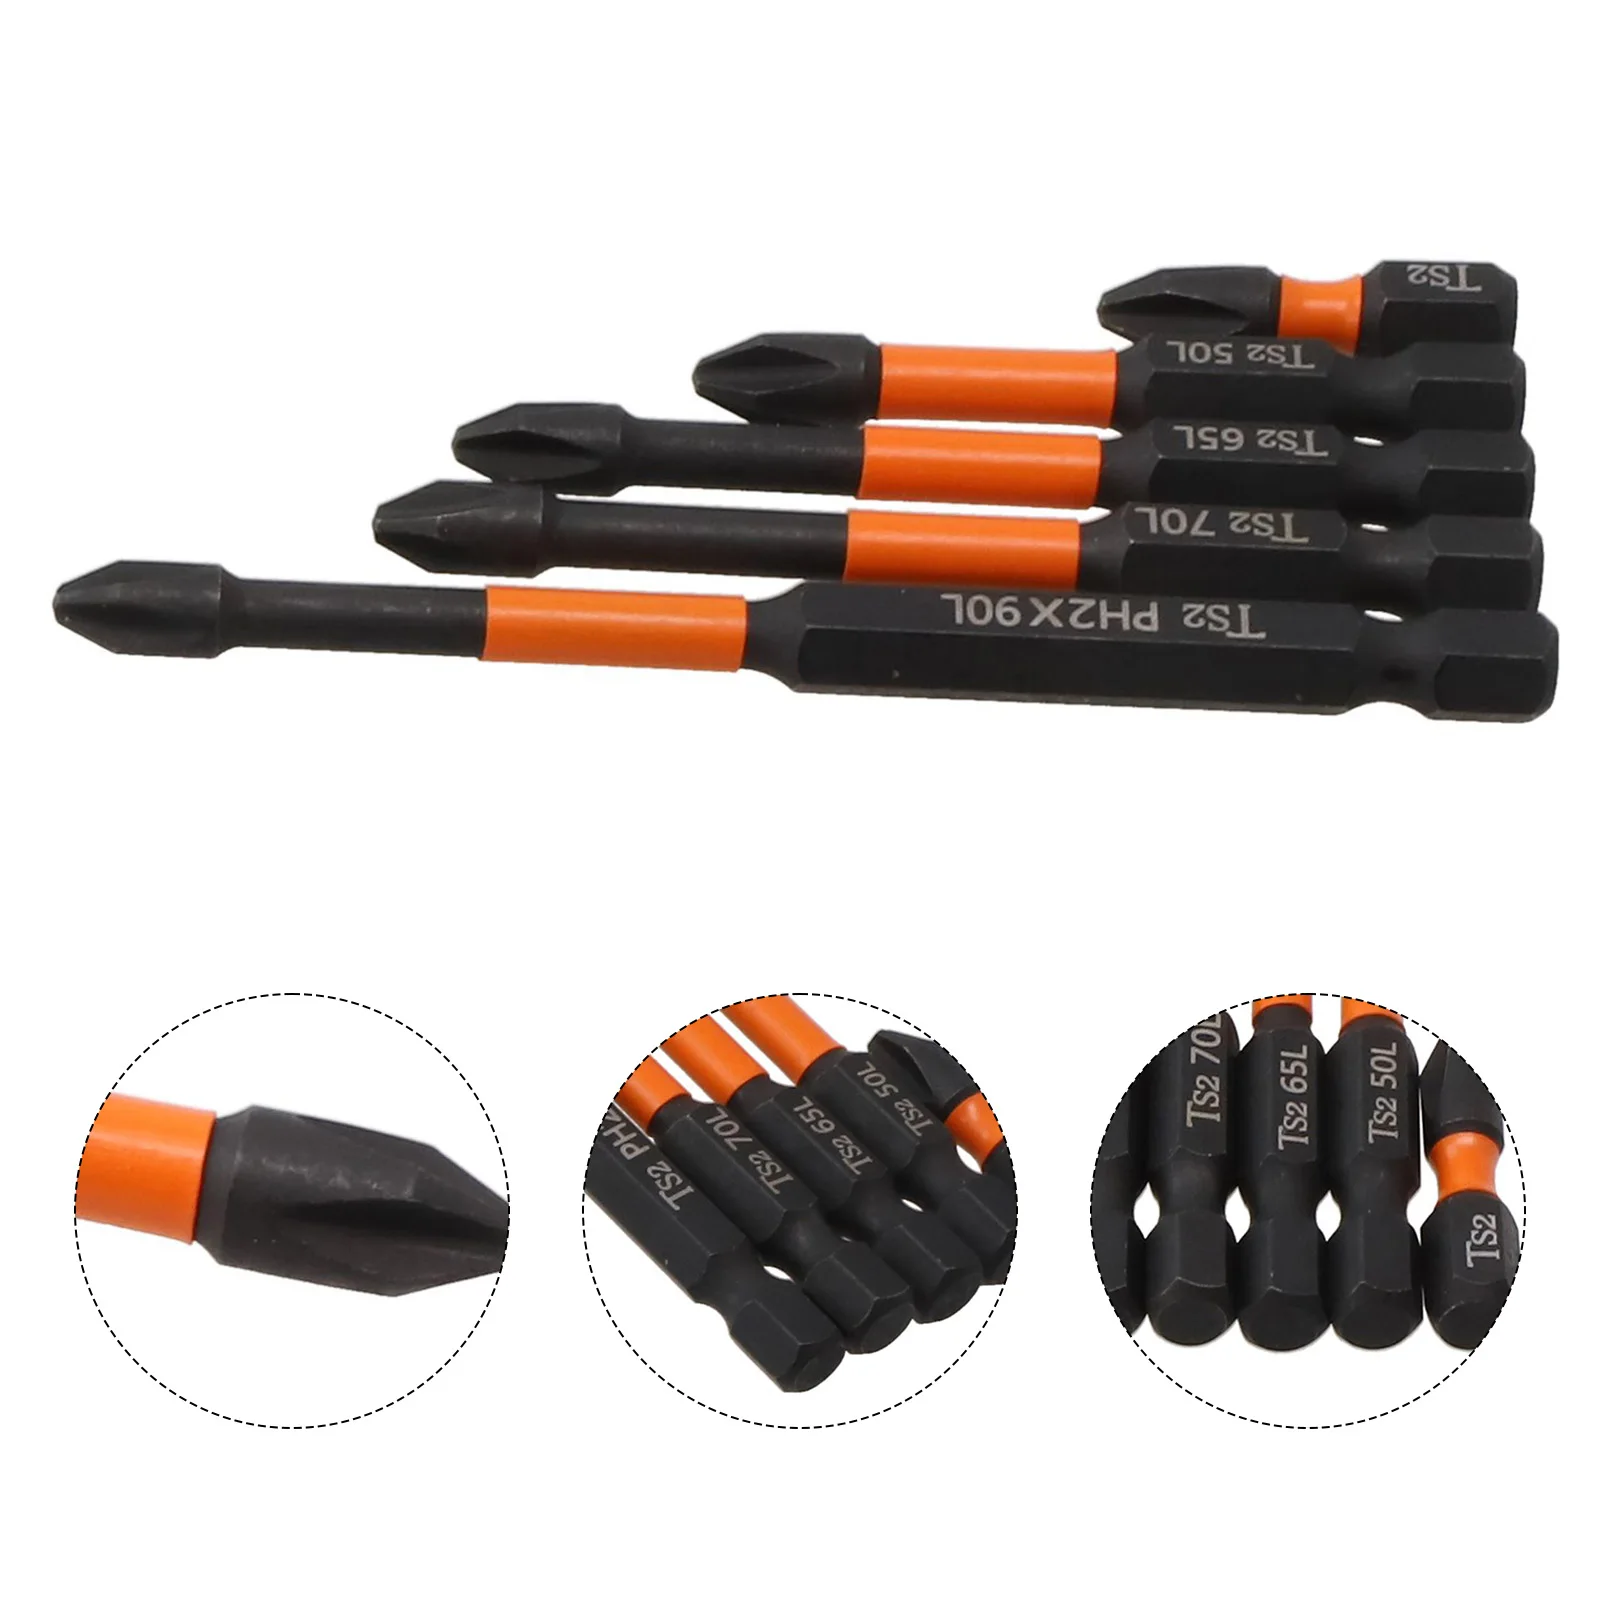 

Bit Set Screwdriver Bits 1/4Inch Hex 25mm 50mm 65mm 90mm Alloy Steel Black Cross Impact Magnetic None Durable None